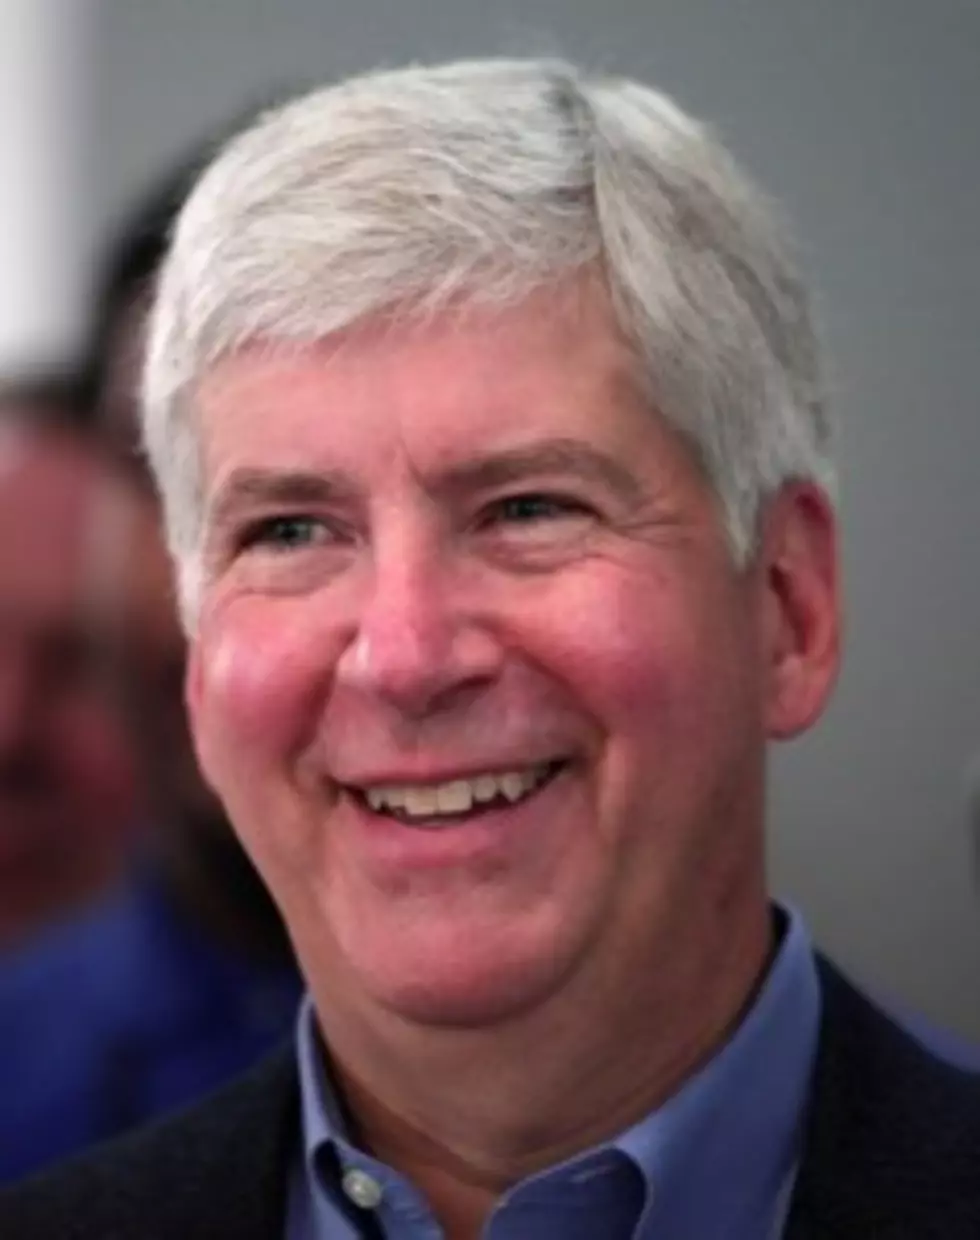 Snyder Hospitalized with Blood Clot